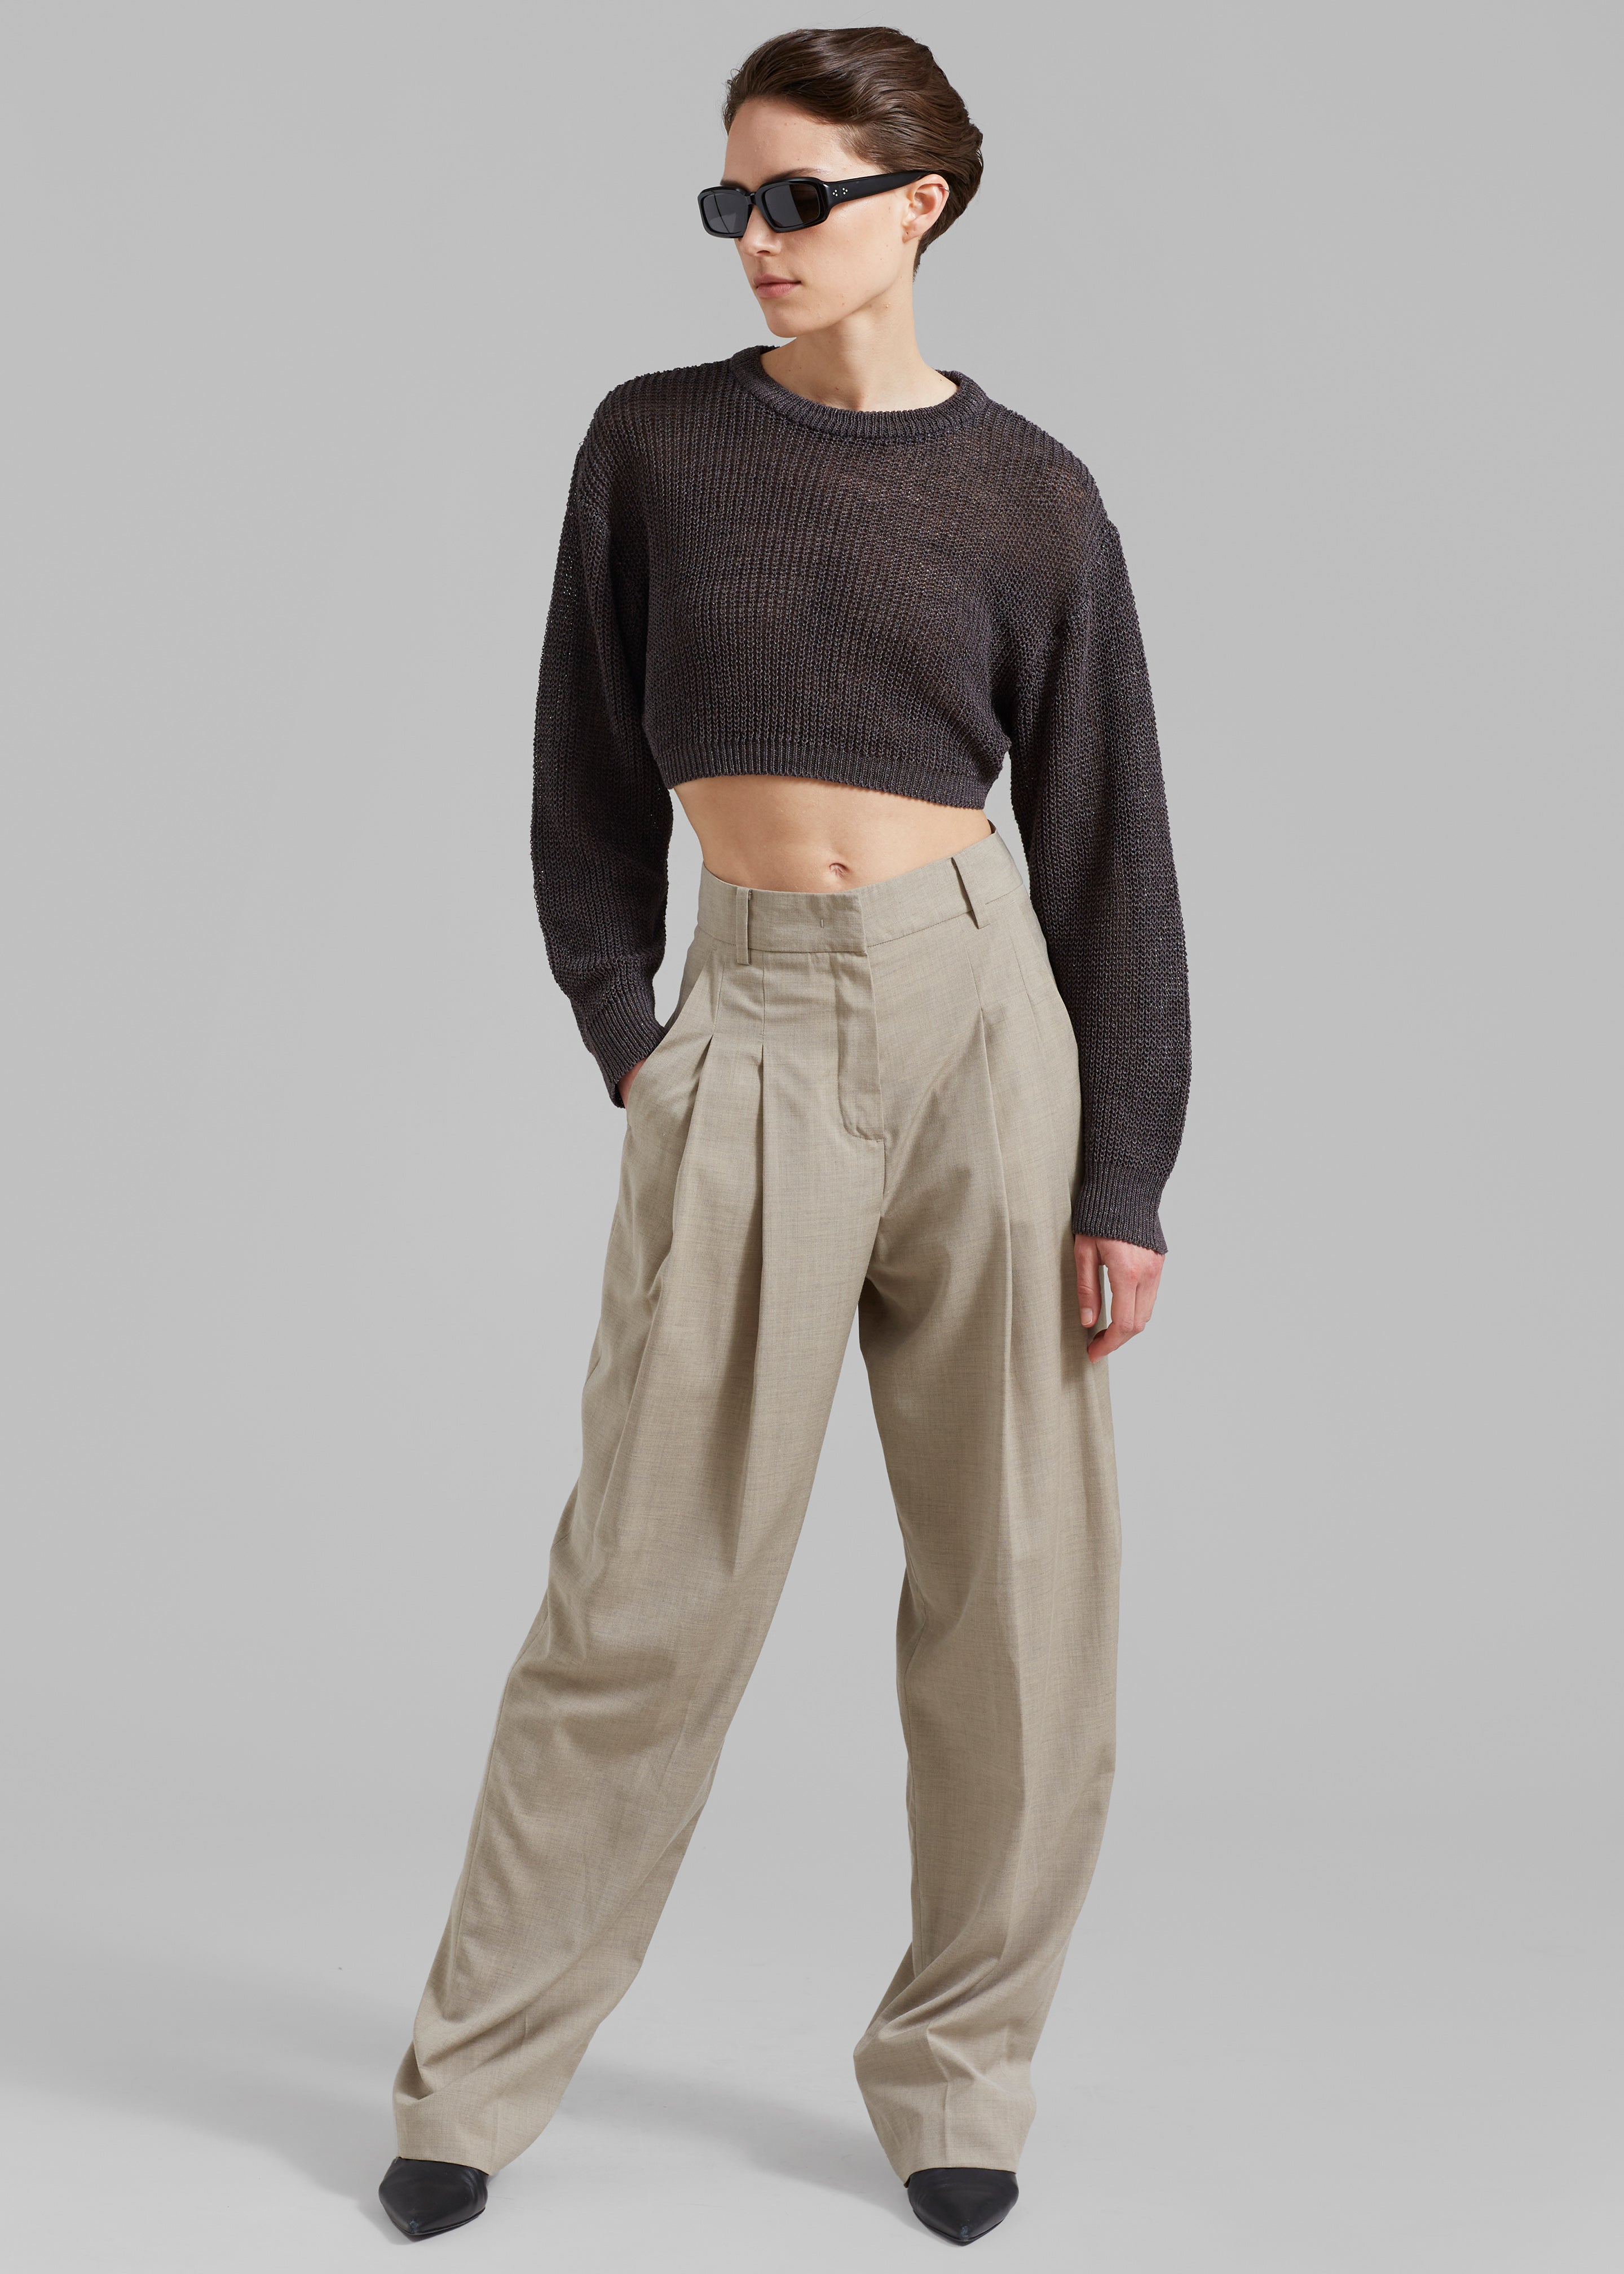 Abi Cropped Knit Top - Charcoal - 2